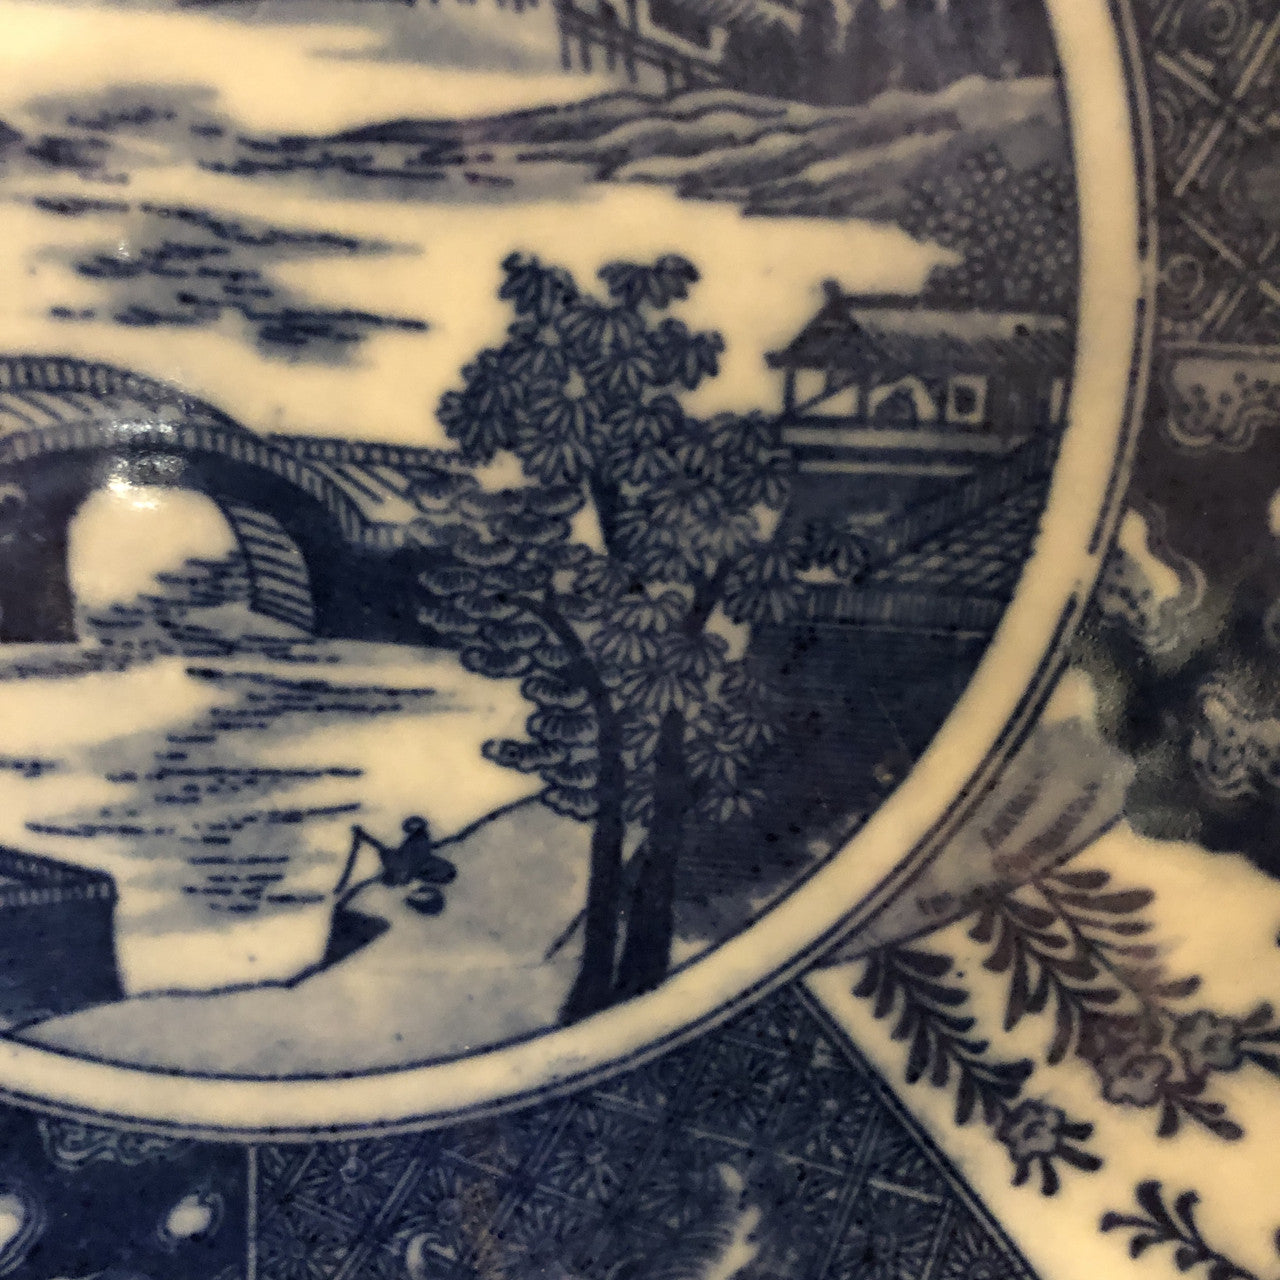 Japanese Igezara Blue and White Charger, Meiji Period